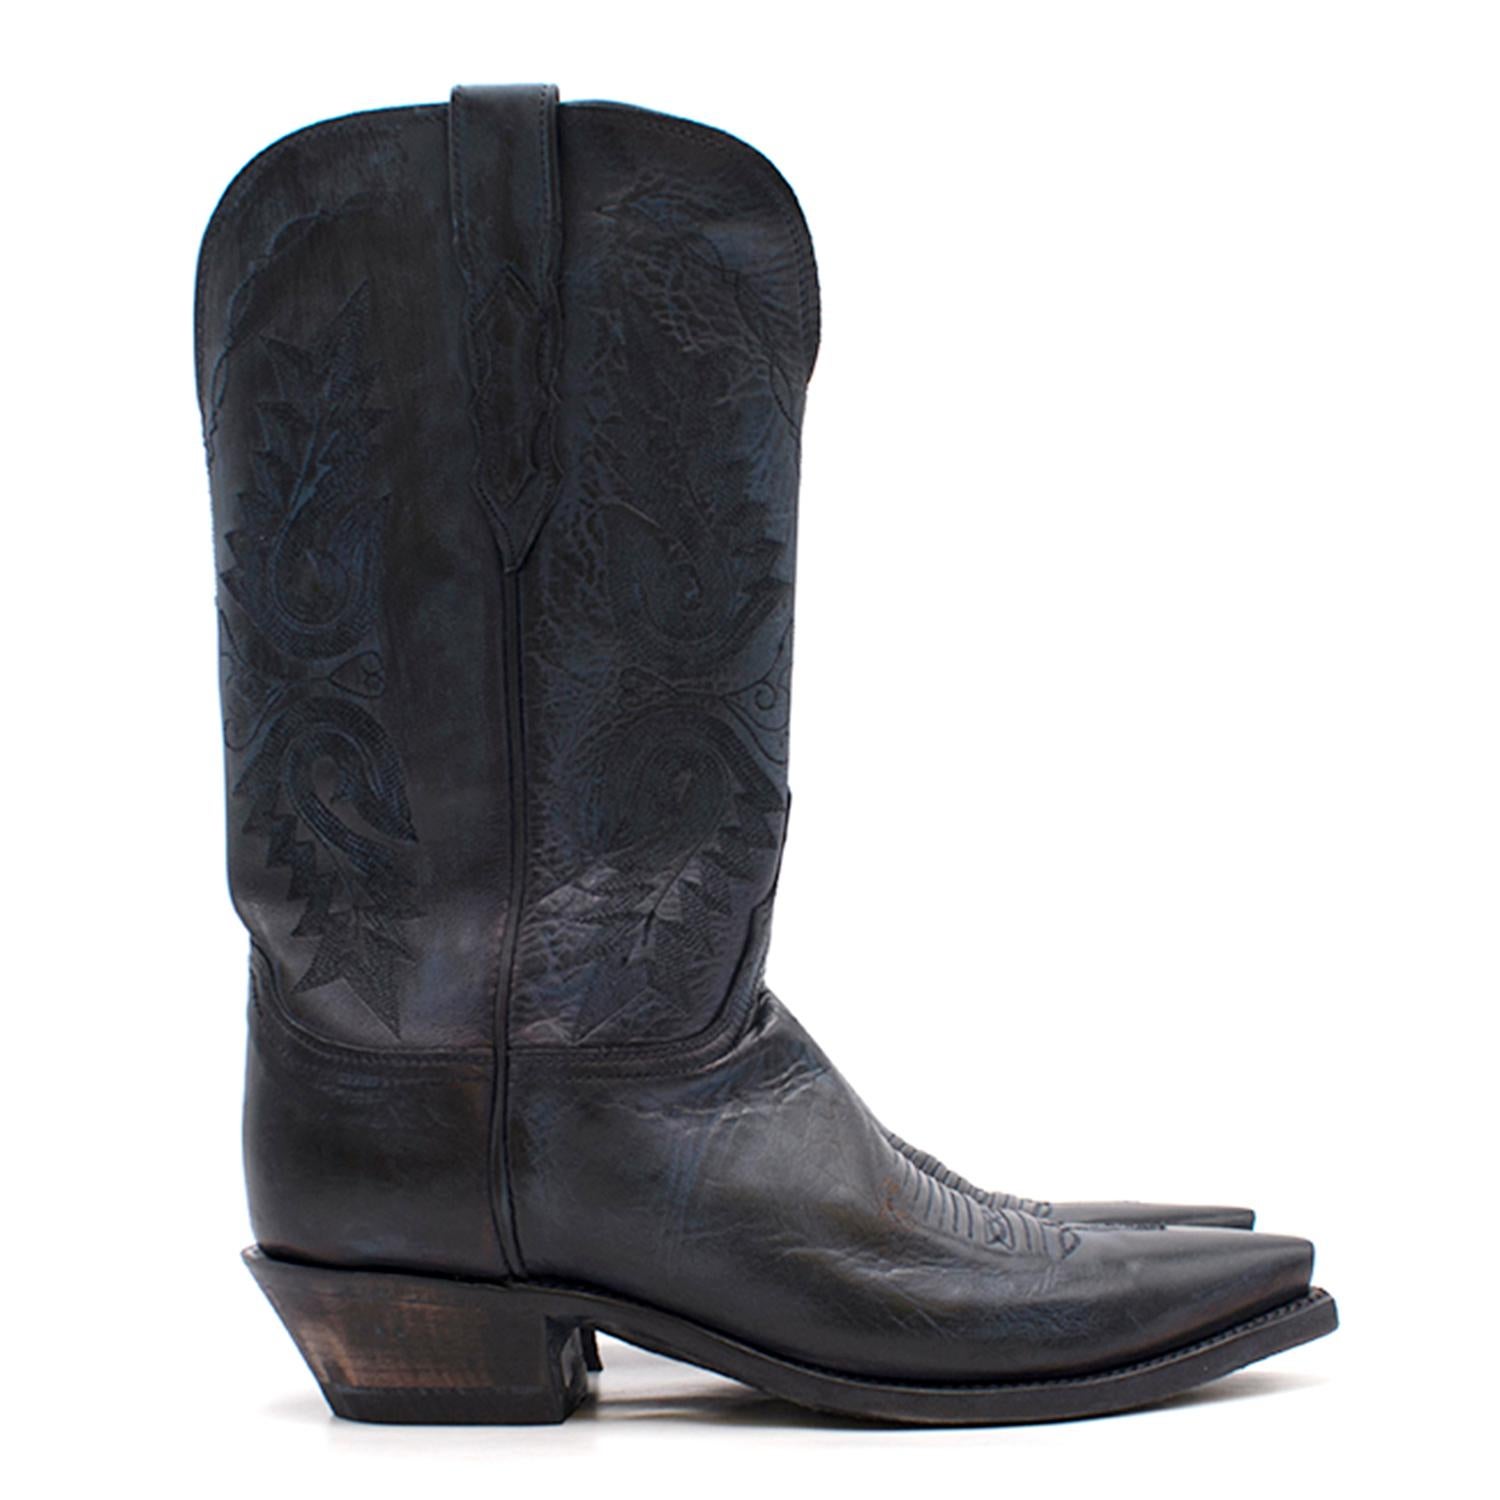 Lucchese Bootmaker Pointed Blue Leather Western Boots

- Pointed toe with a squared finish
- Slanted chunky heel with a distressed finish
- Calf-height
- Pull-on style
- Distressed style blue leather
- Pull tabs on either side at the boot opening 
-